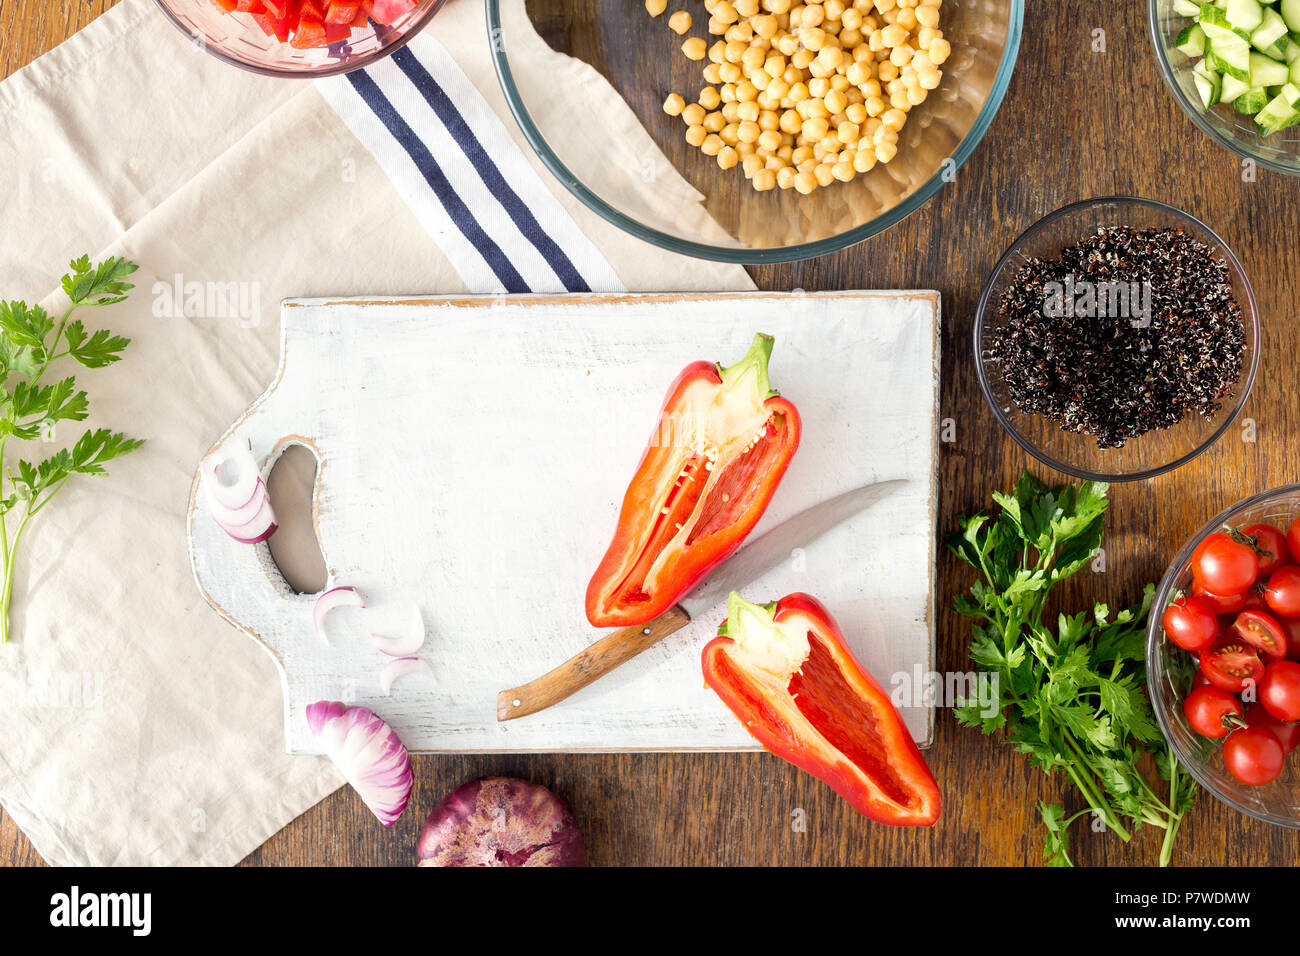 Ingredients for cooking vegetarian salad with chickpeas, black quinoa and vegetables on wooden table, top view. Superfood concept Stock Photo